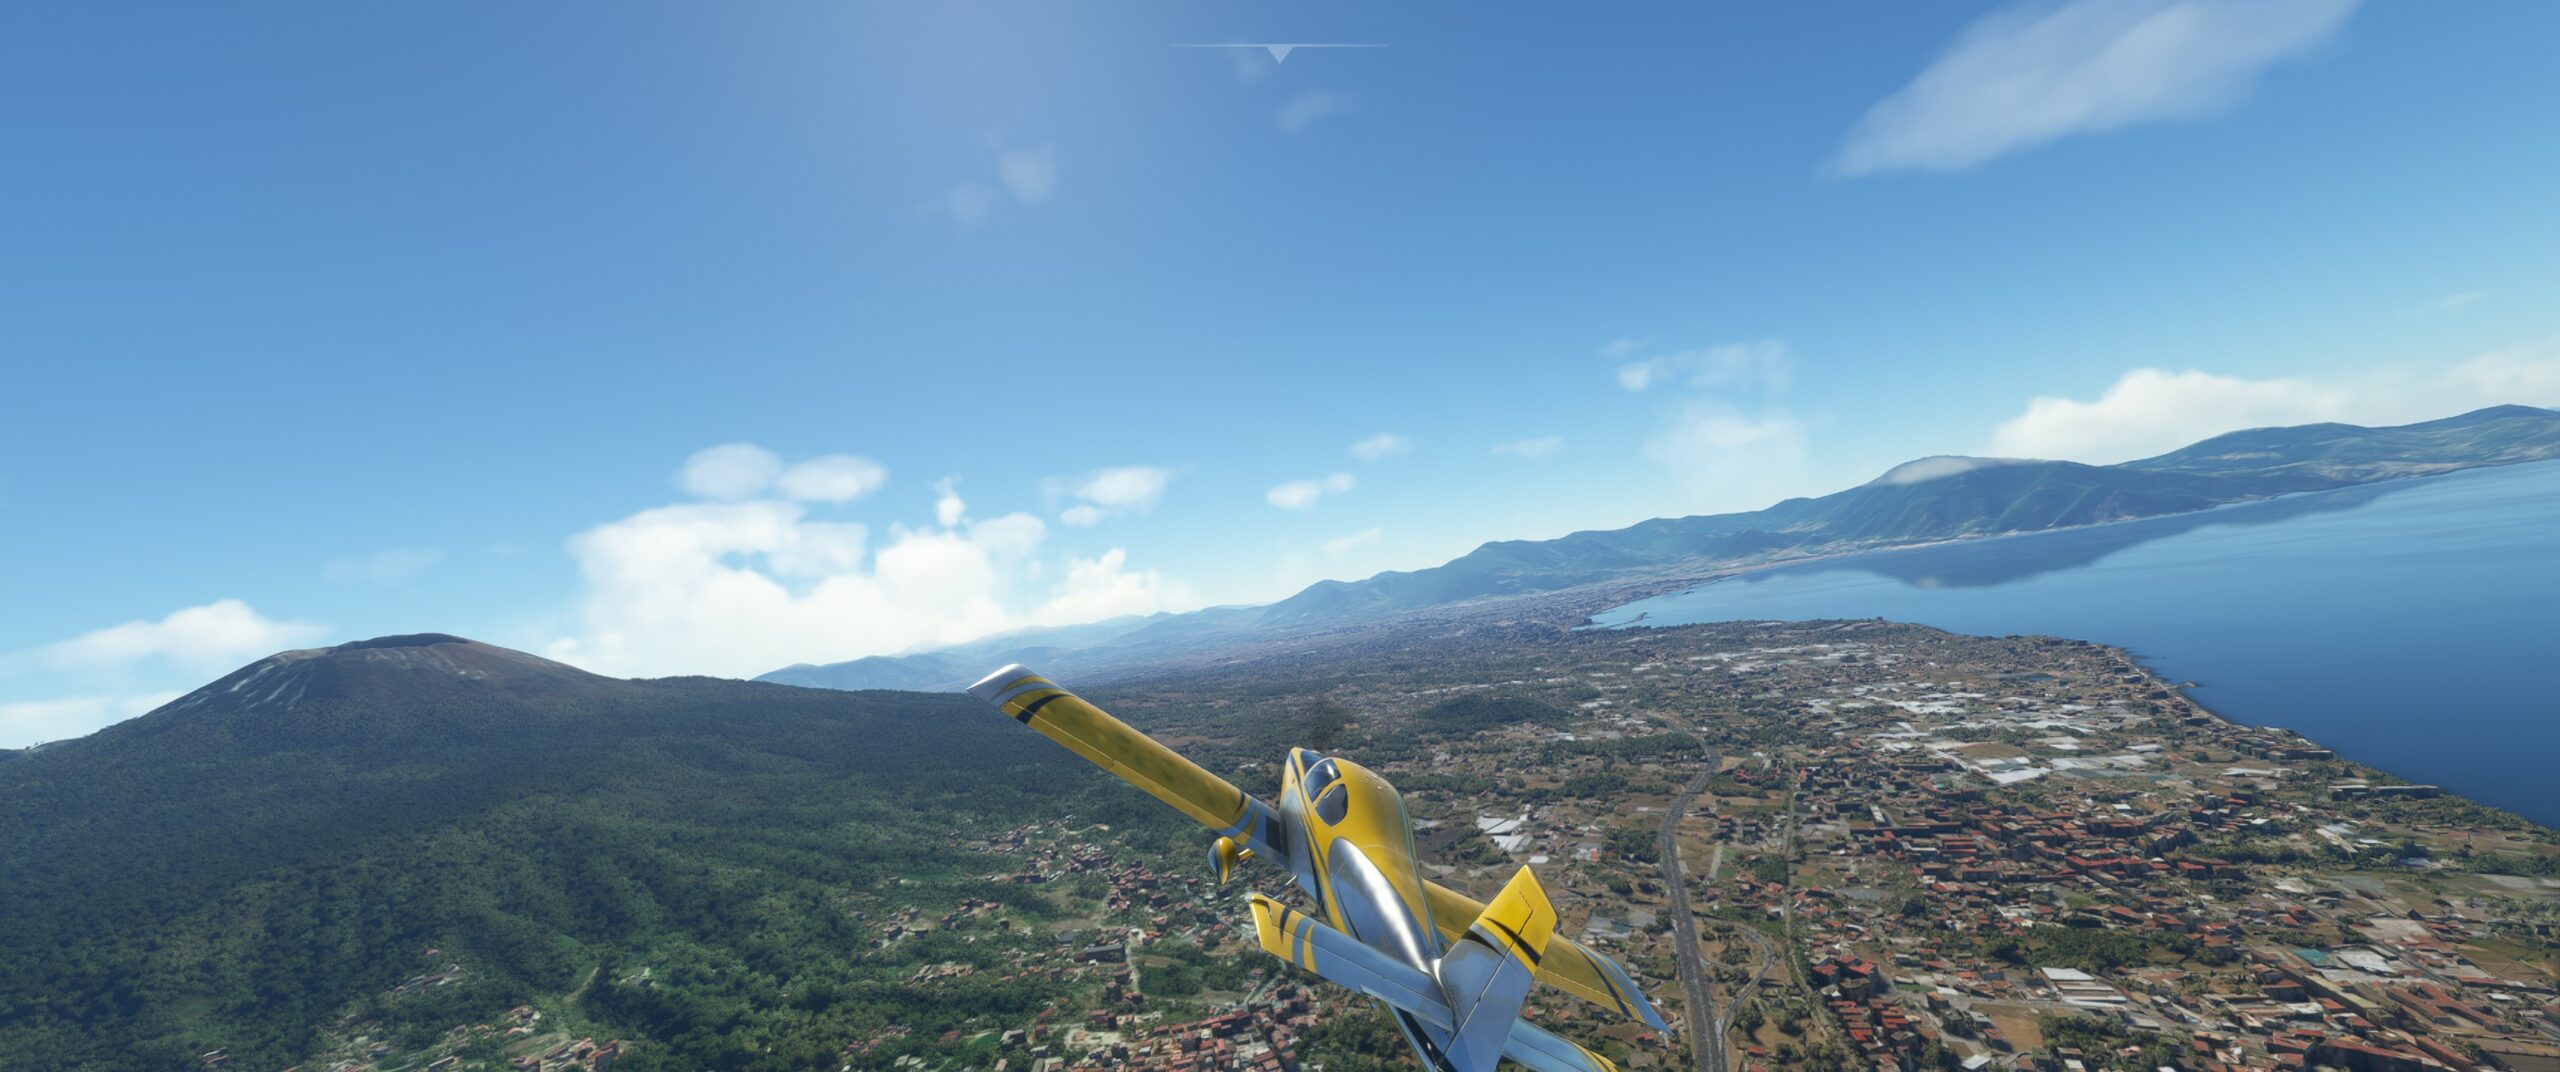 Sky4Sim addon – New update available! – 1.6.2.0